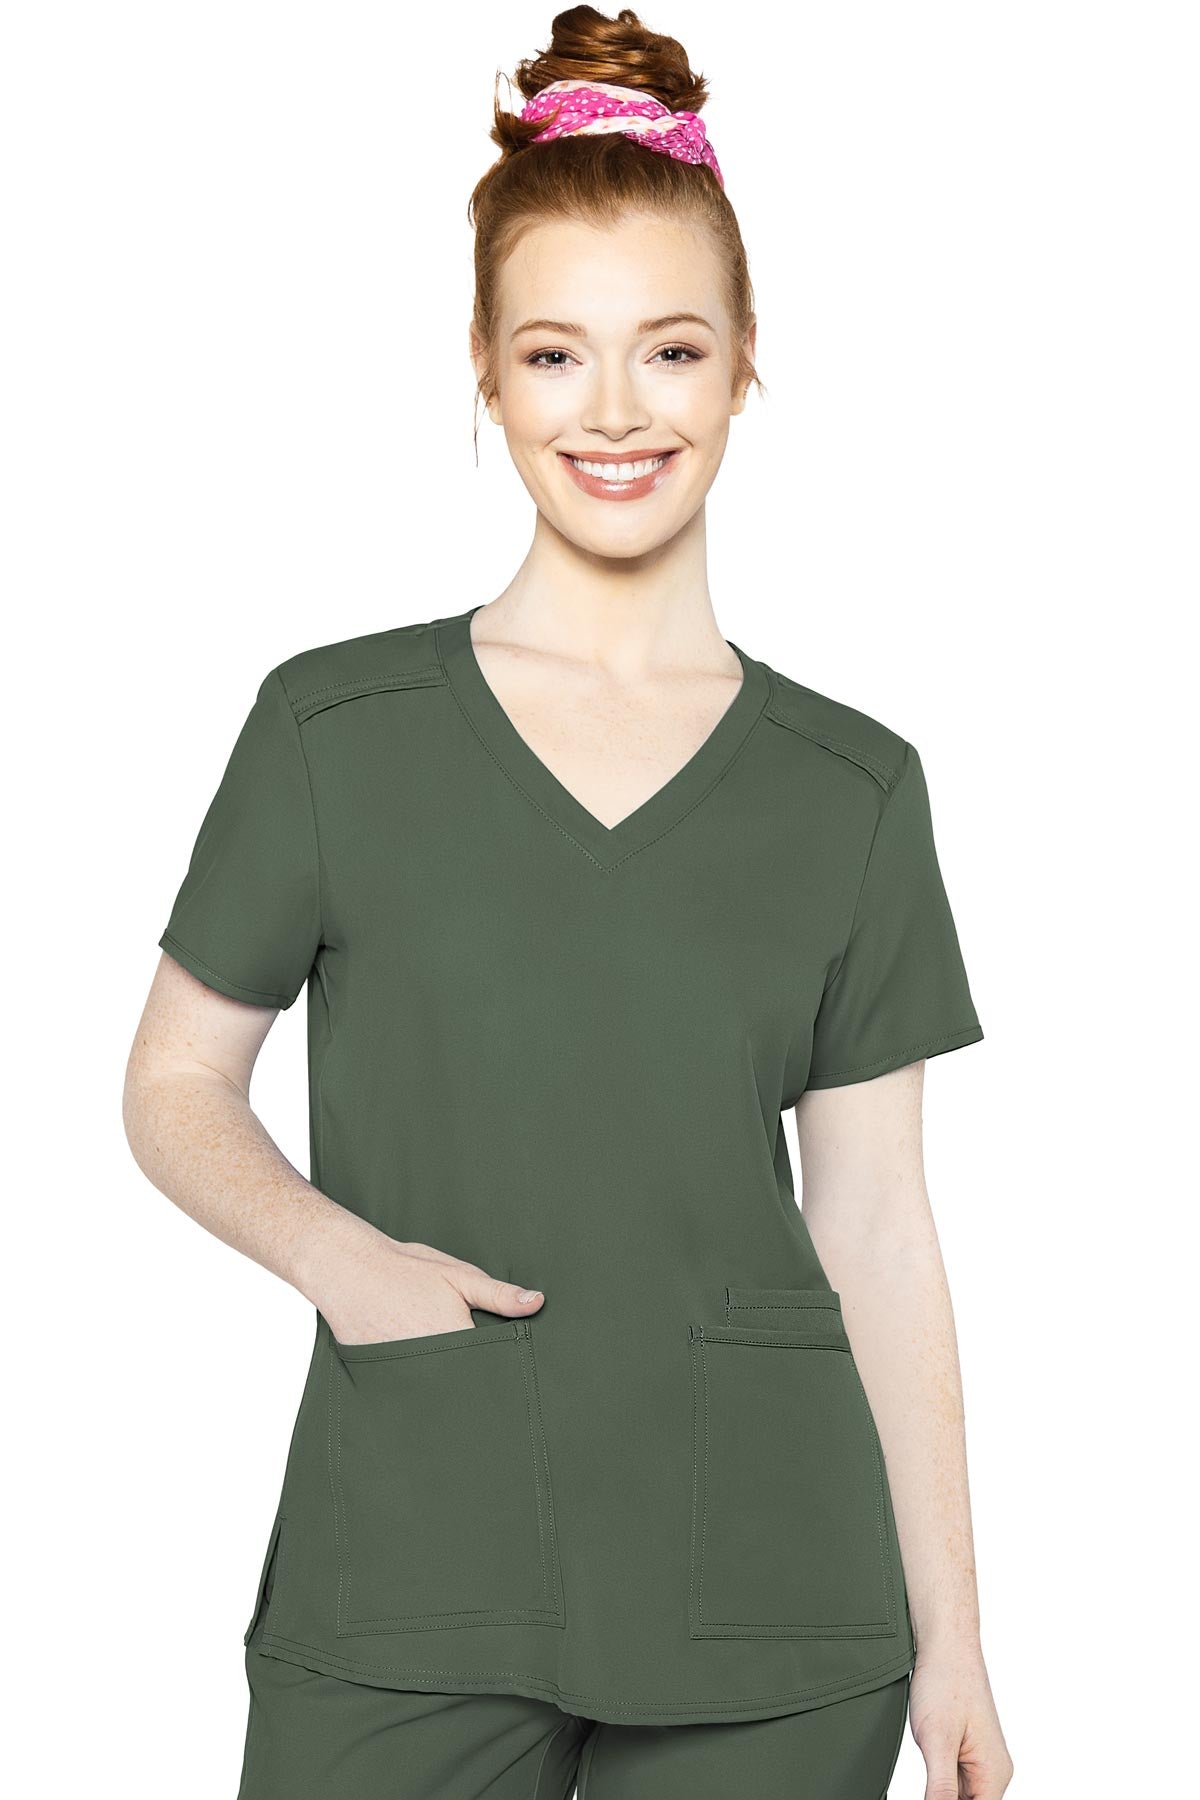 Med Couture Scrub Top Insight Classic V-Neck 3 Pocket in Olive at Parker's Clothing and Shoes.